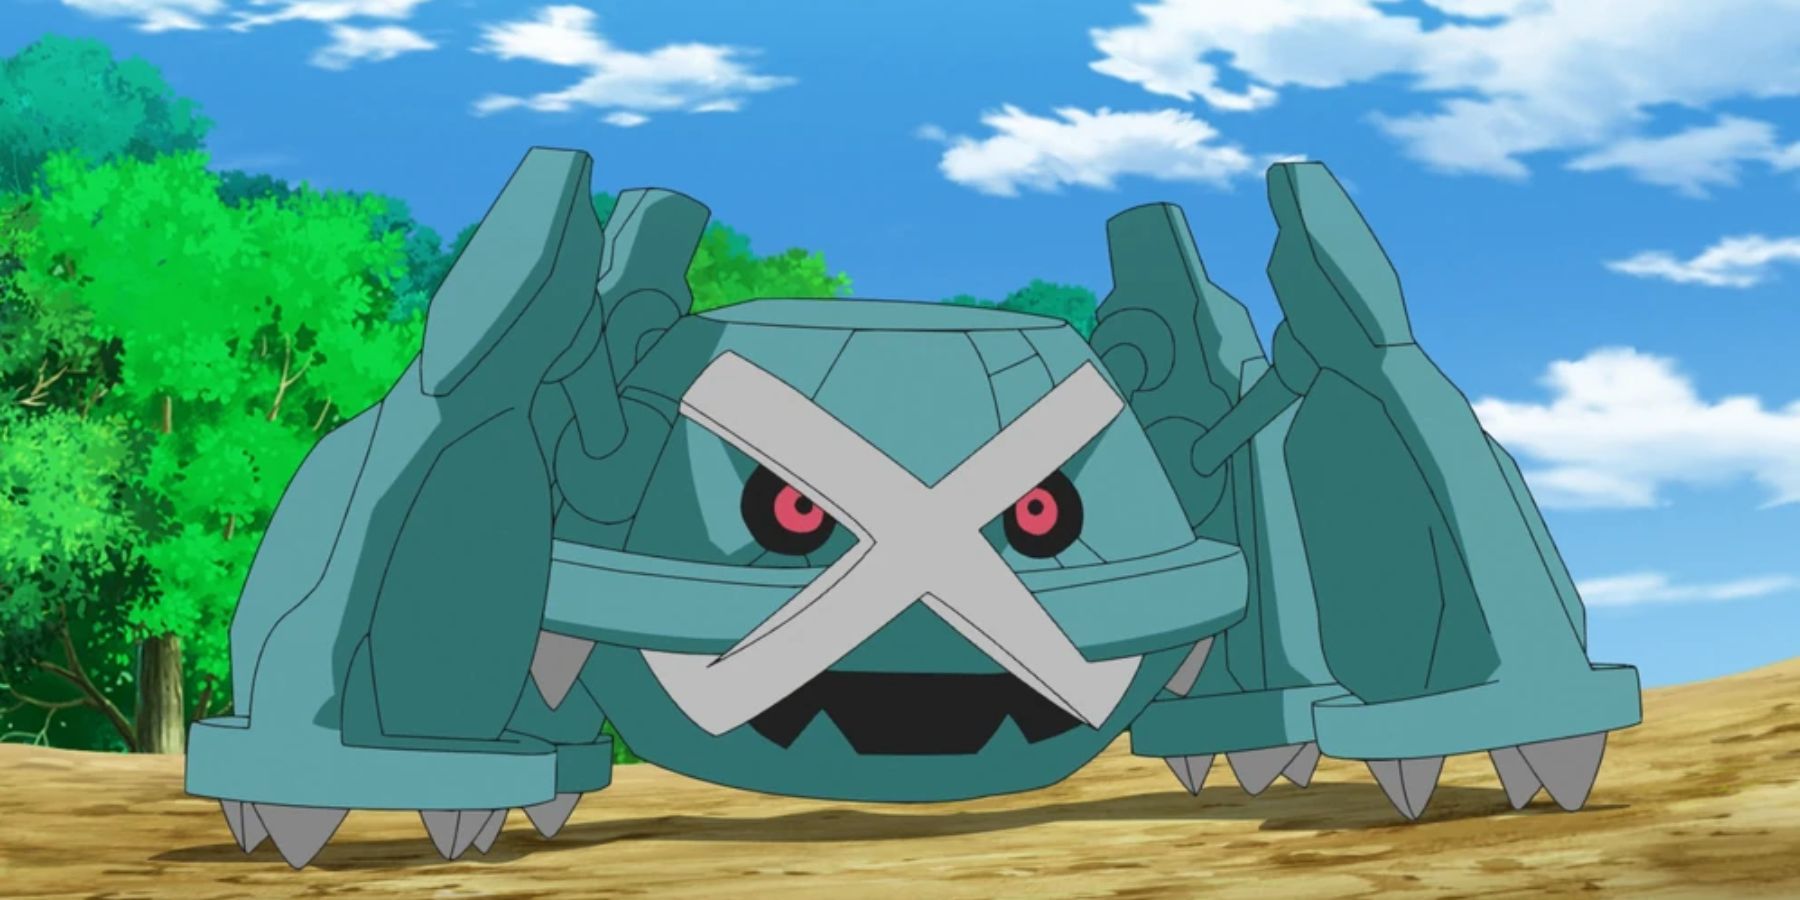 Metagross opens its mouth in an agressive manner, with a forested area behind it